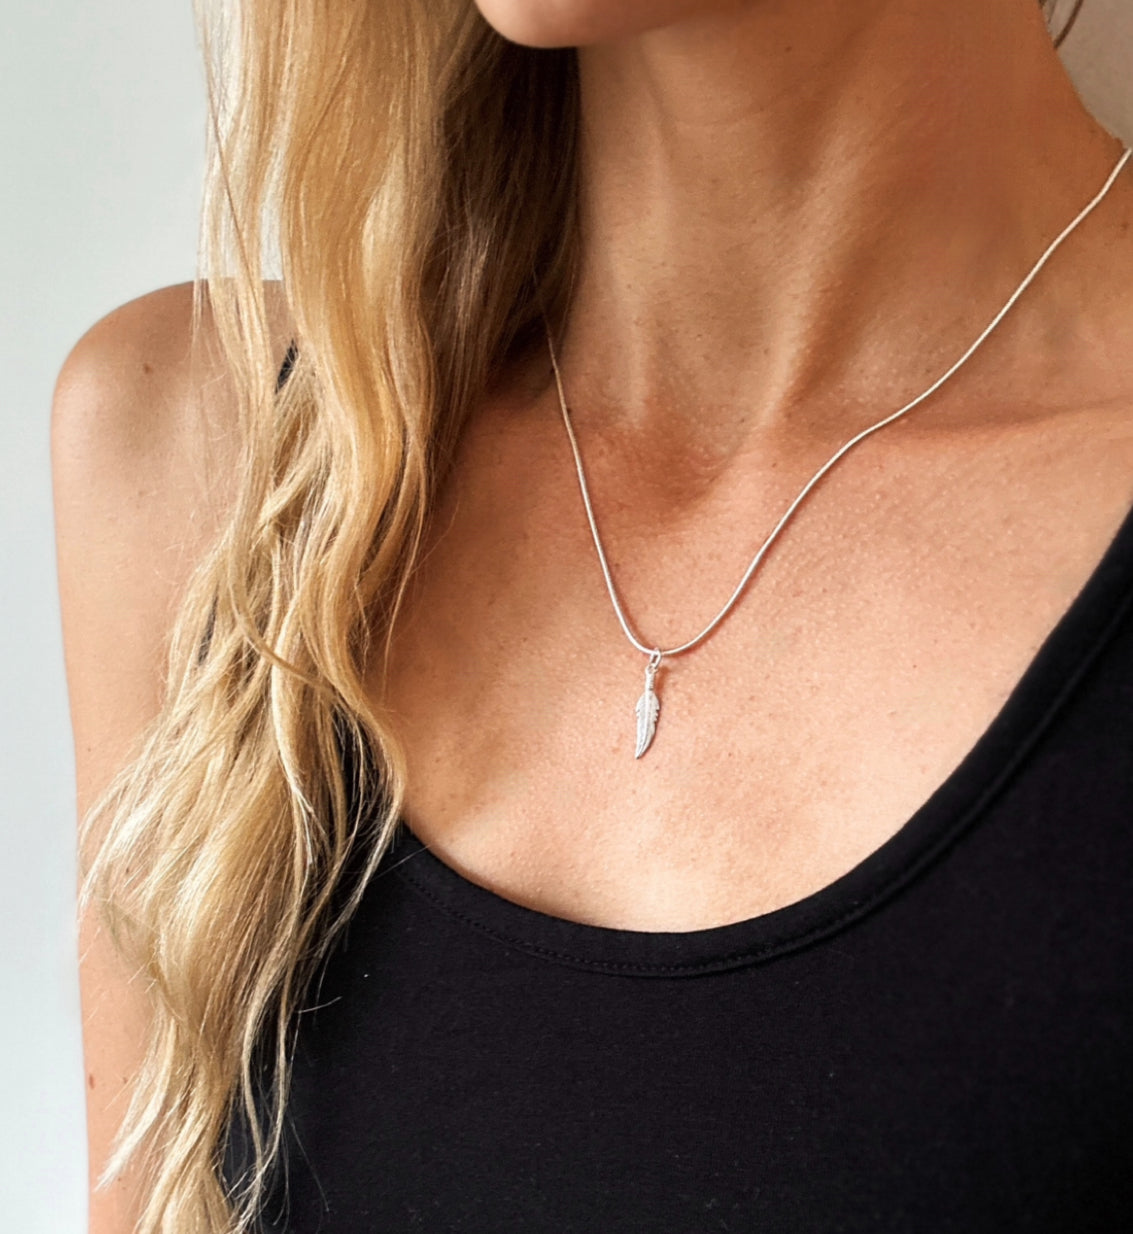 The Free Spirit Necklace